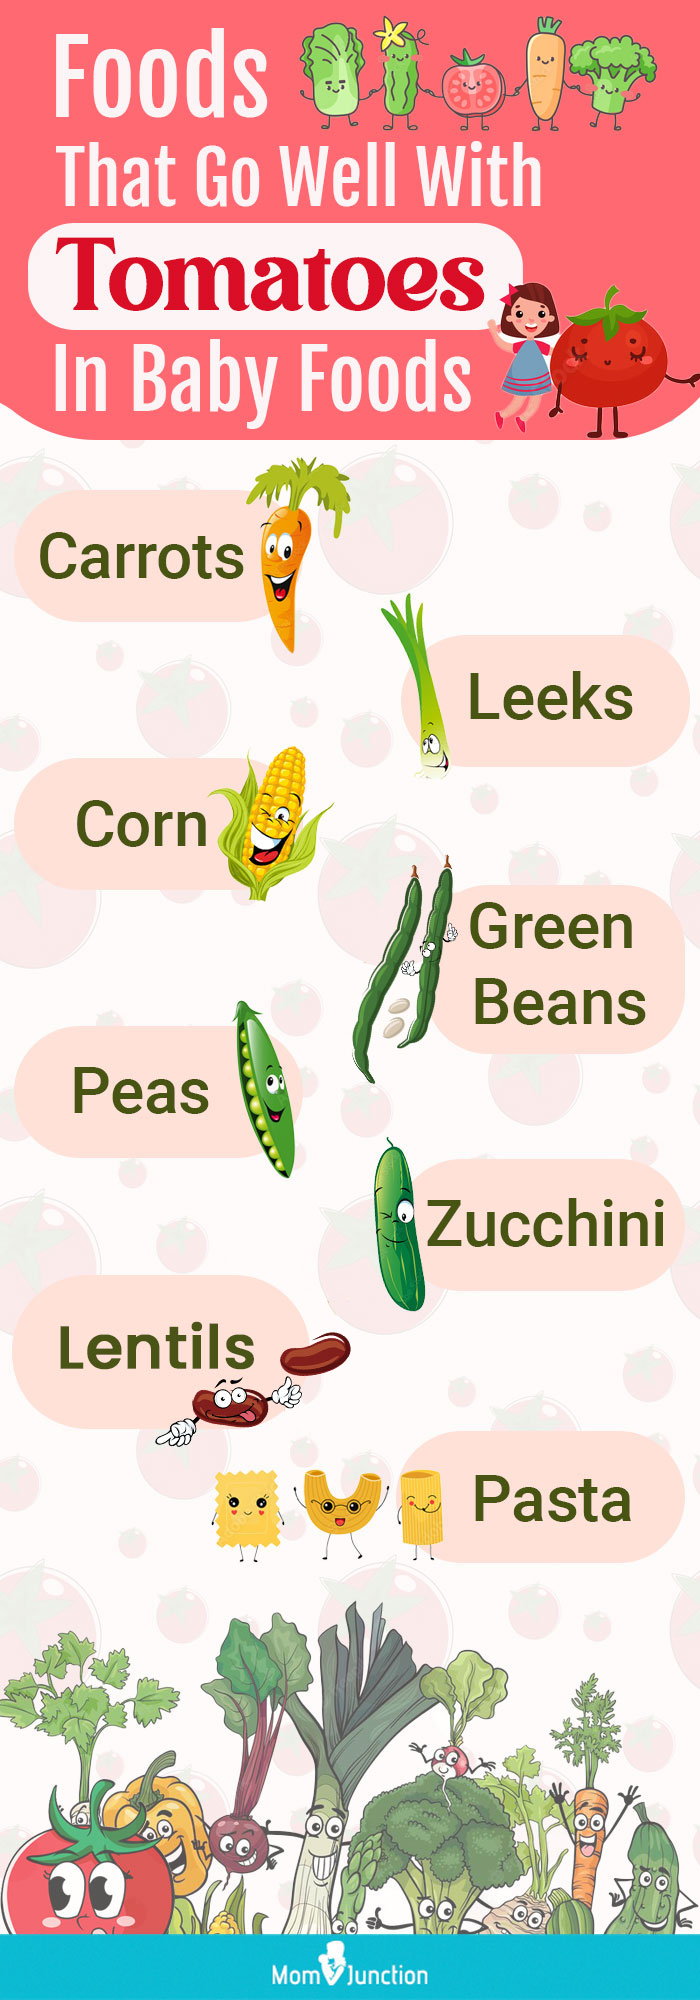 tomatoes in baby foods [infographic]